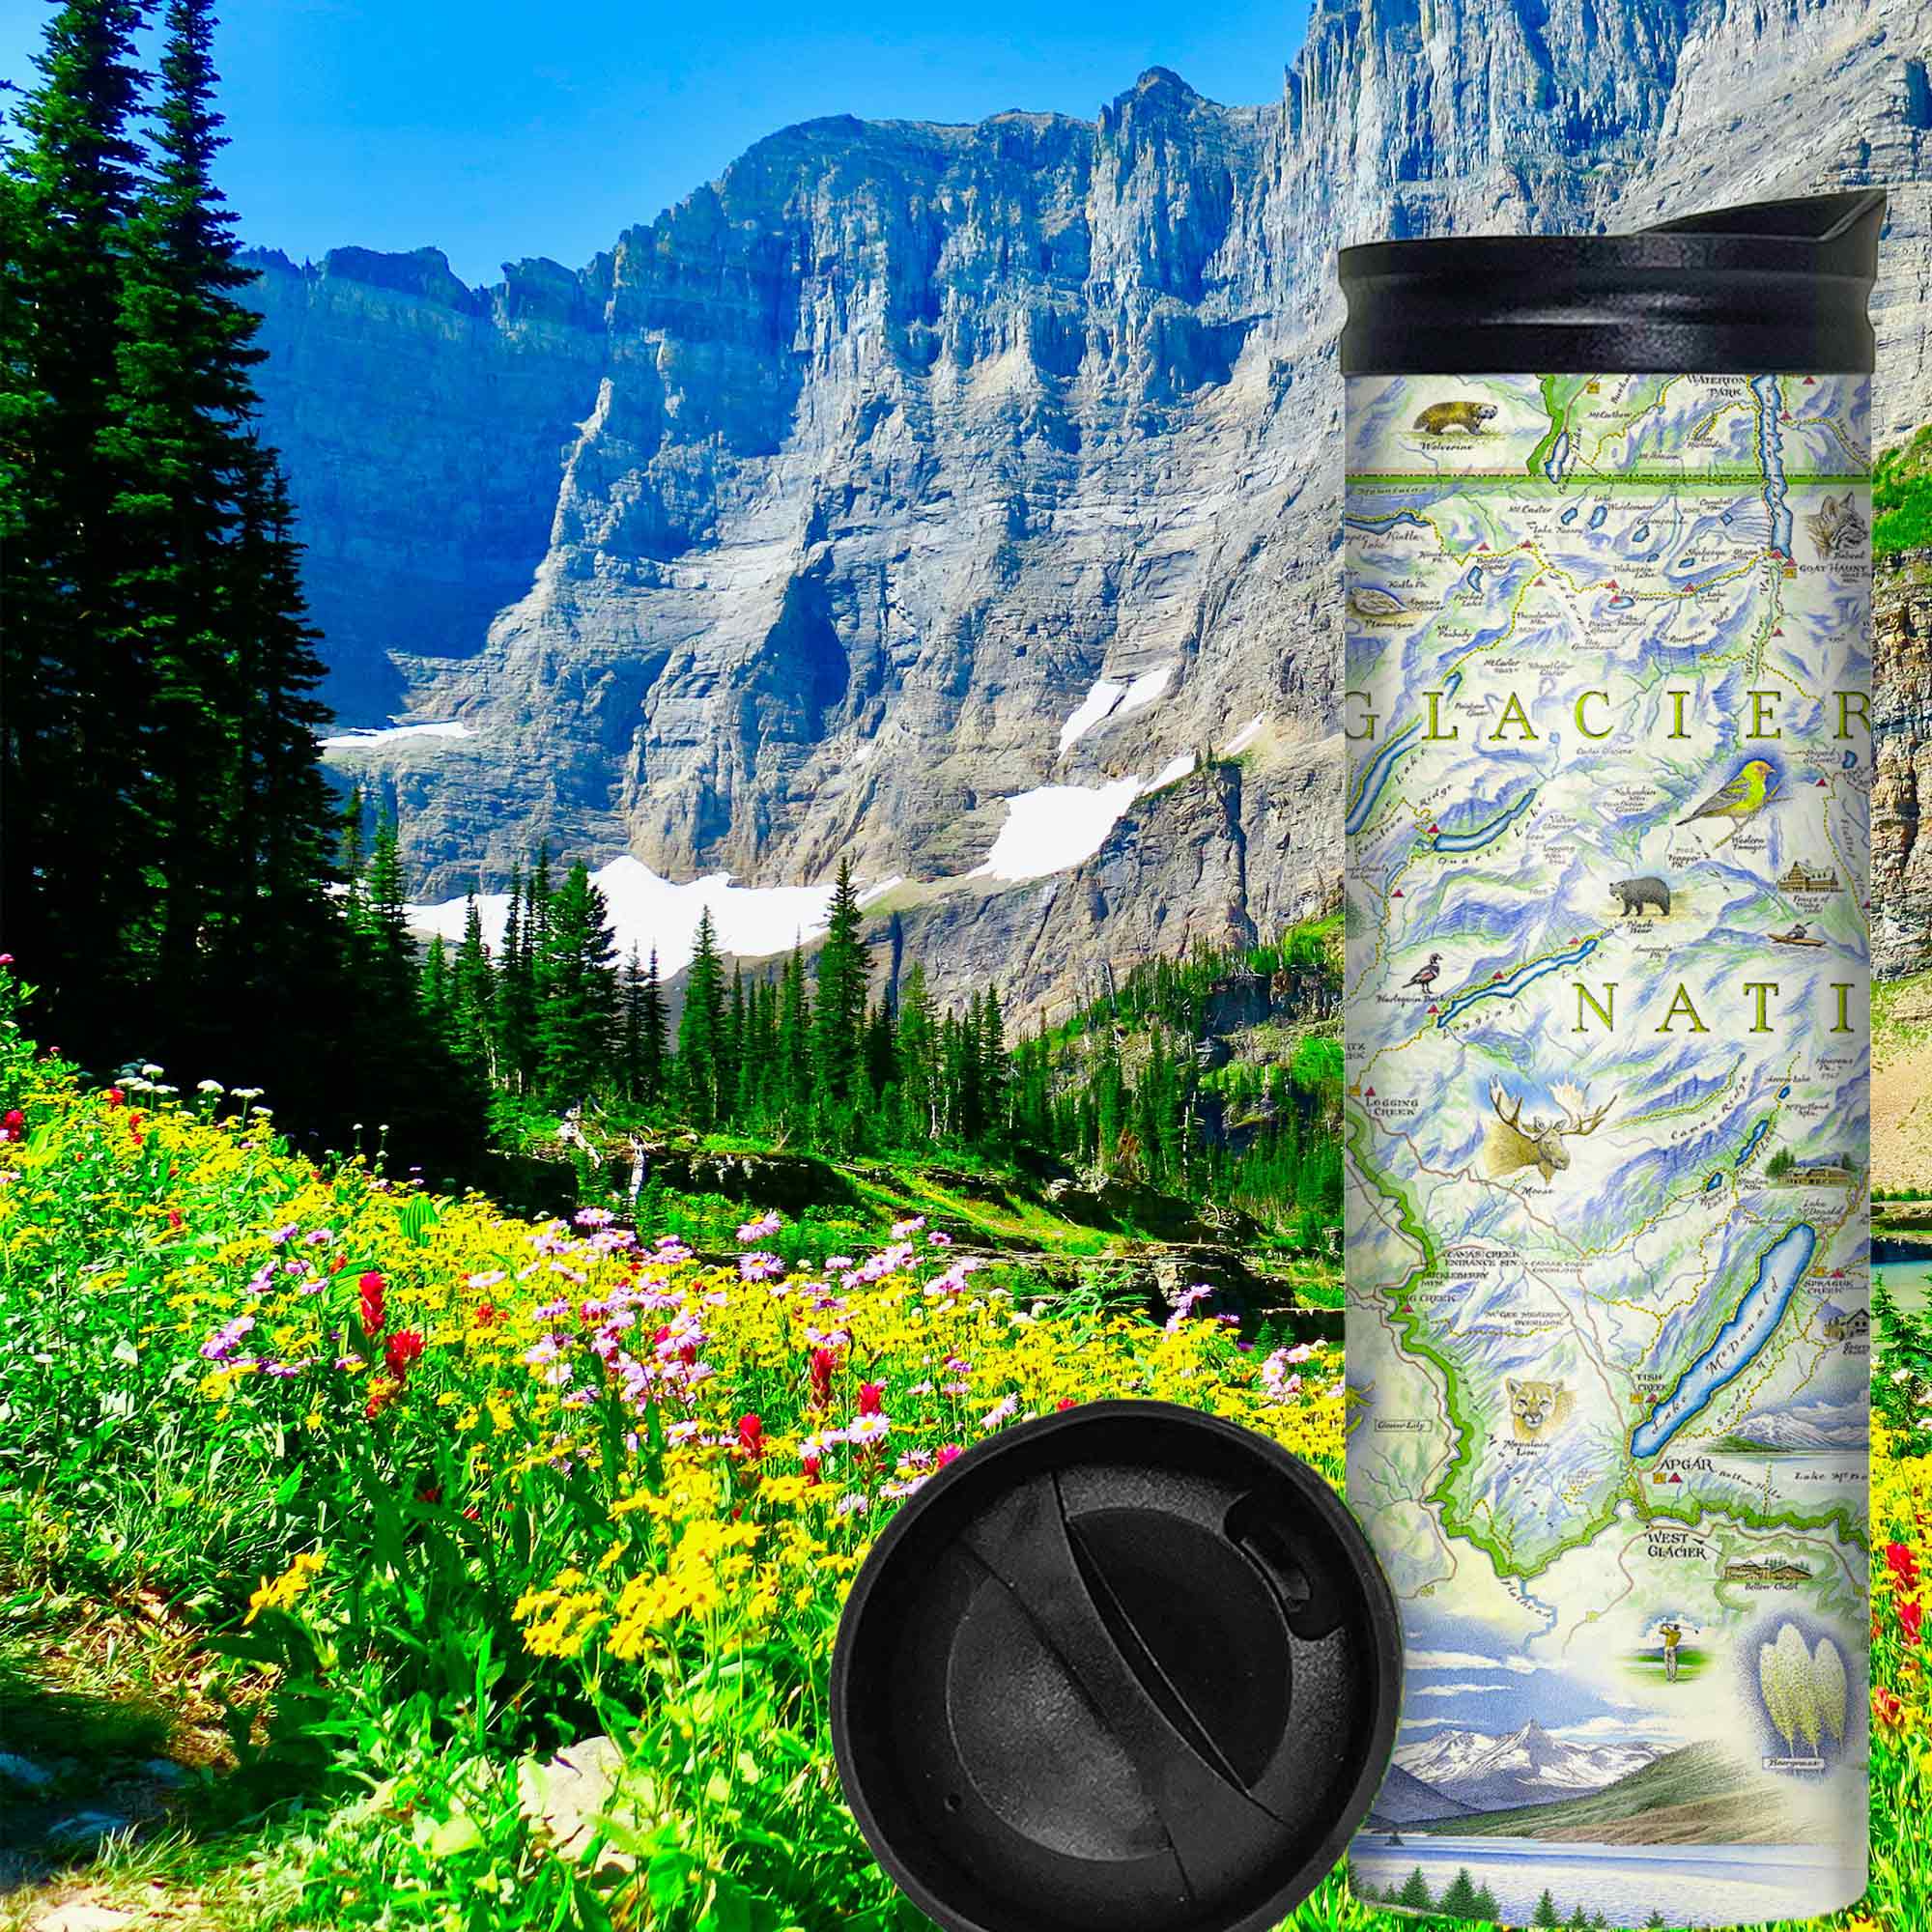 Glacier National Park Map travel drinkware is sitting in a grassy field with wild flowers in Glacier. The backgoruns has a snoe capped mountain. The map features places in the park such as Logan Pass, Lake McDonald Lodge, Many Glacier Lodge, Two Medicine, Glacier Park Lodge, and the Going-to-the-sun Road. Flora and fauna include grizzly bears, elk, moose, mountain goats, and mountain lions.